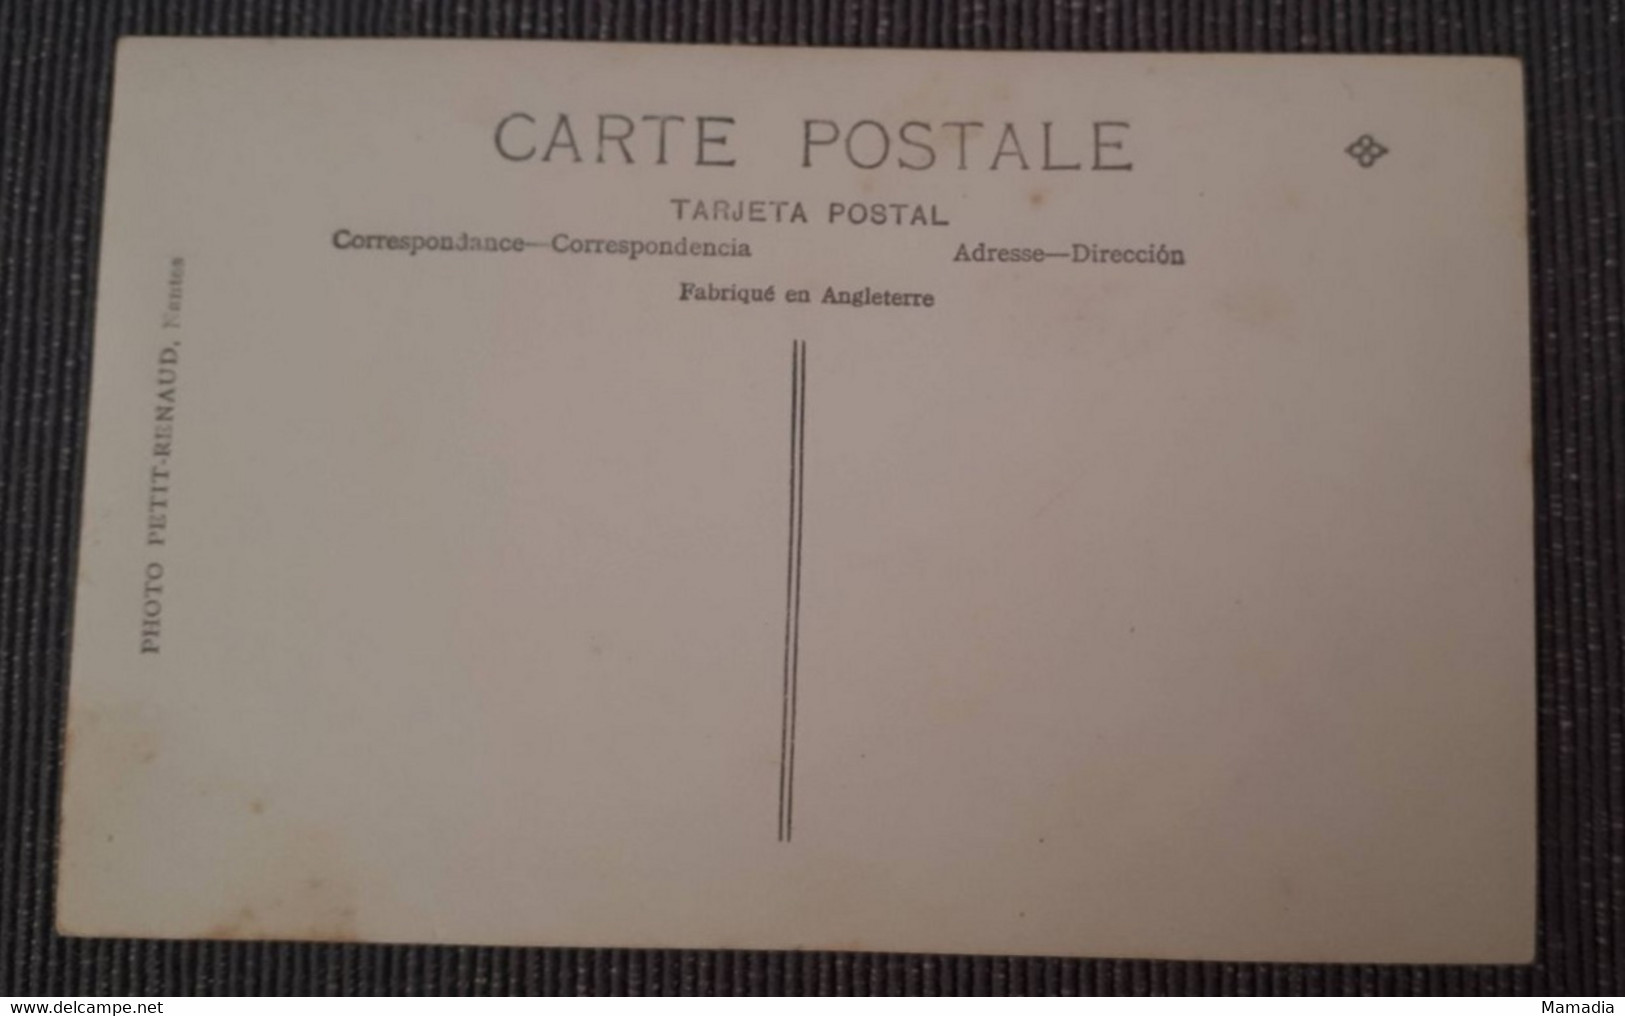 CARTE POSTALE ANCIENNE FANTAISIE ENFANT ET TRICYCLE VELO ANNEES 1900-1920 - Other & Unclassified